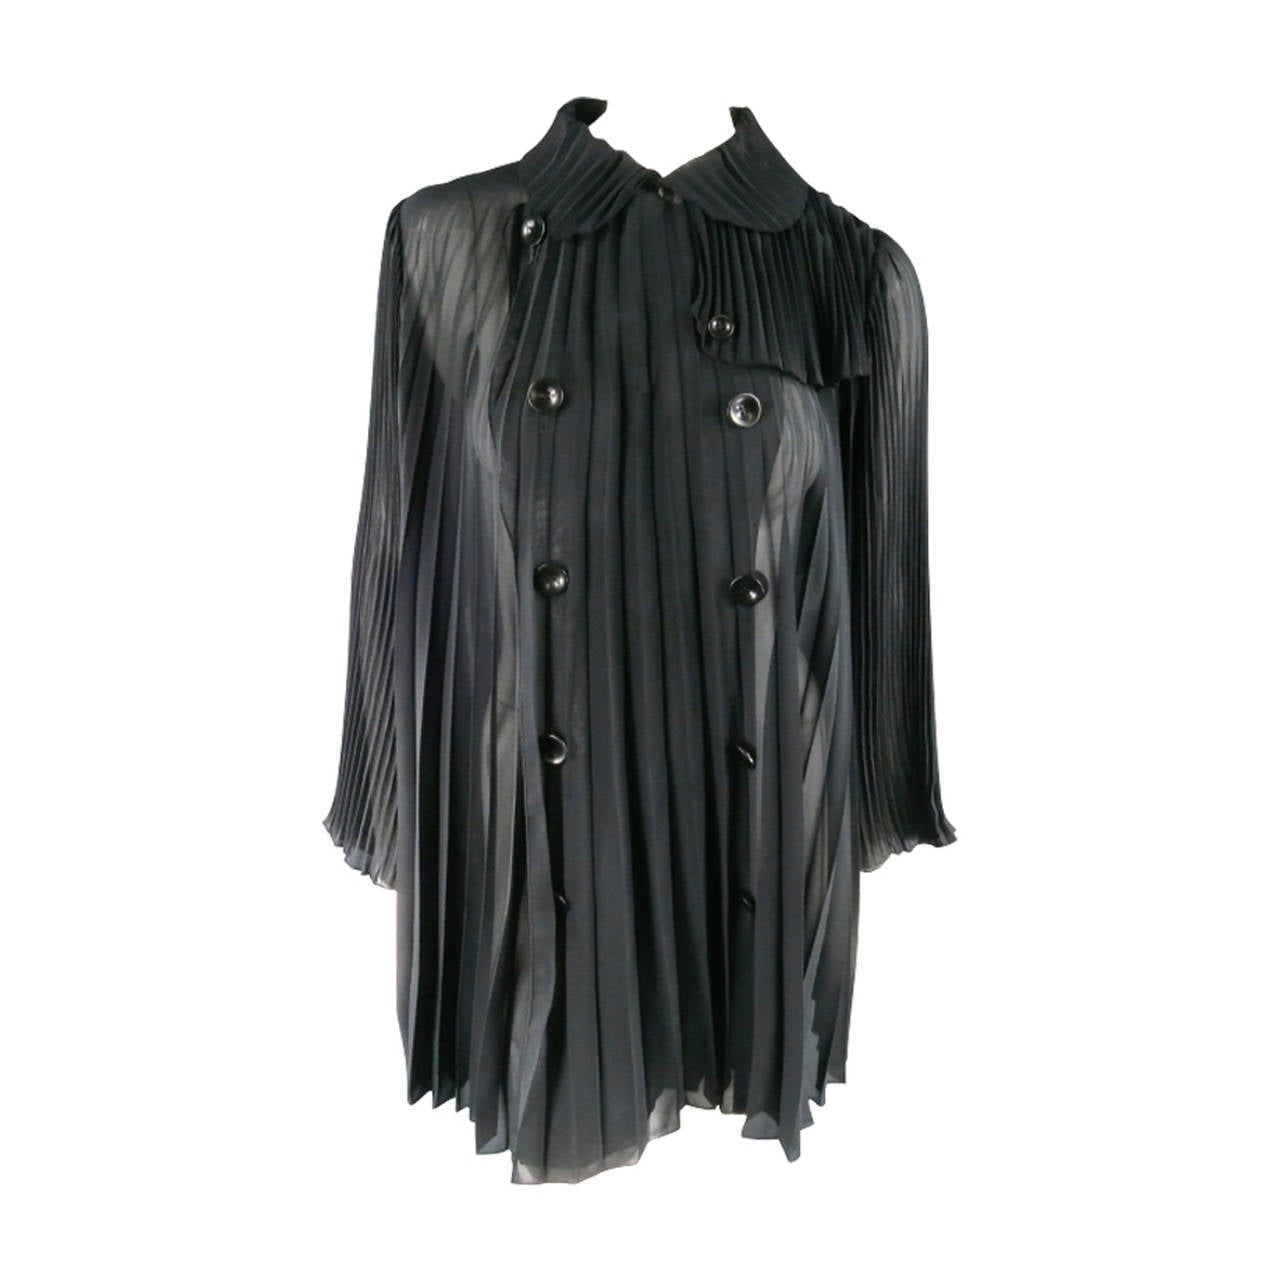 UNDERCOVER Size 2 Black Pleated Chiffon Trench Coat / Dress